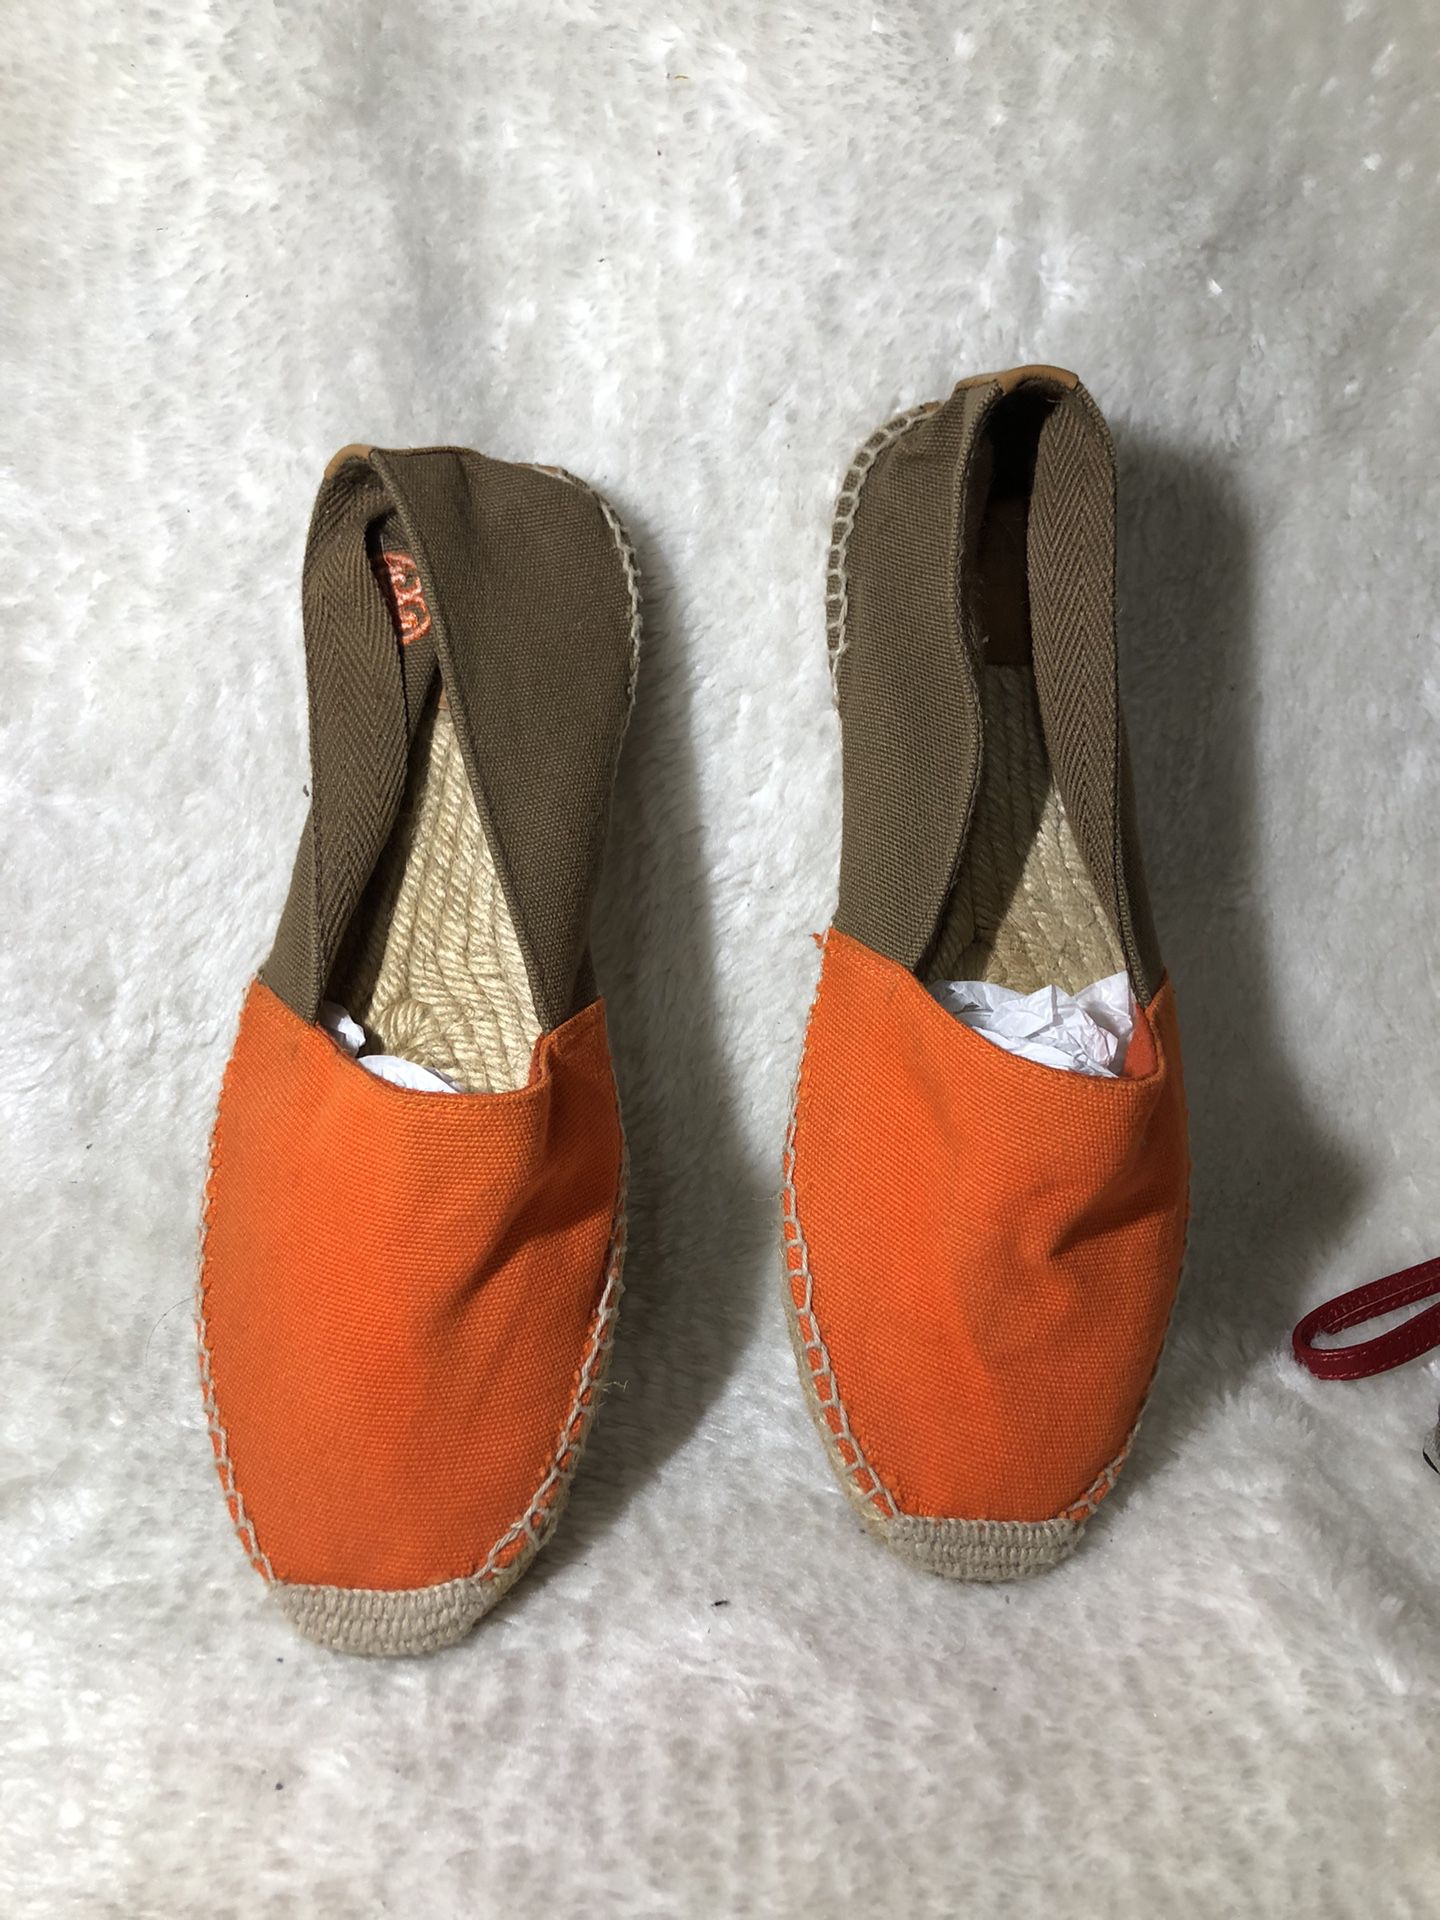 TORY BURCH ORANGE FLAT SHOES SIZE 10 \Made In Spain